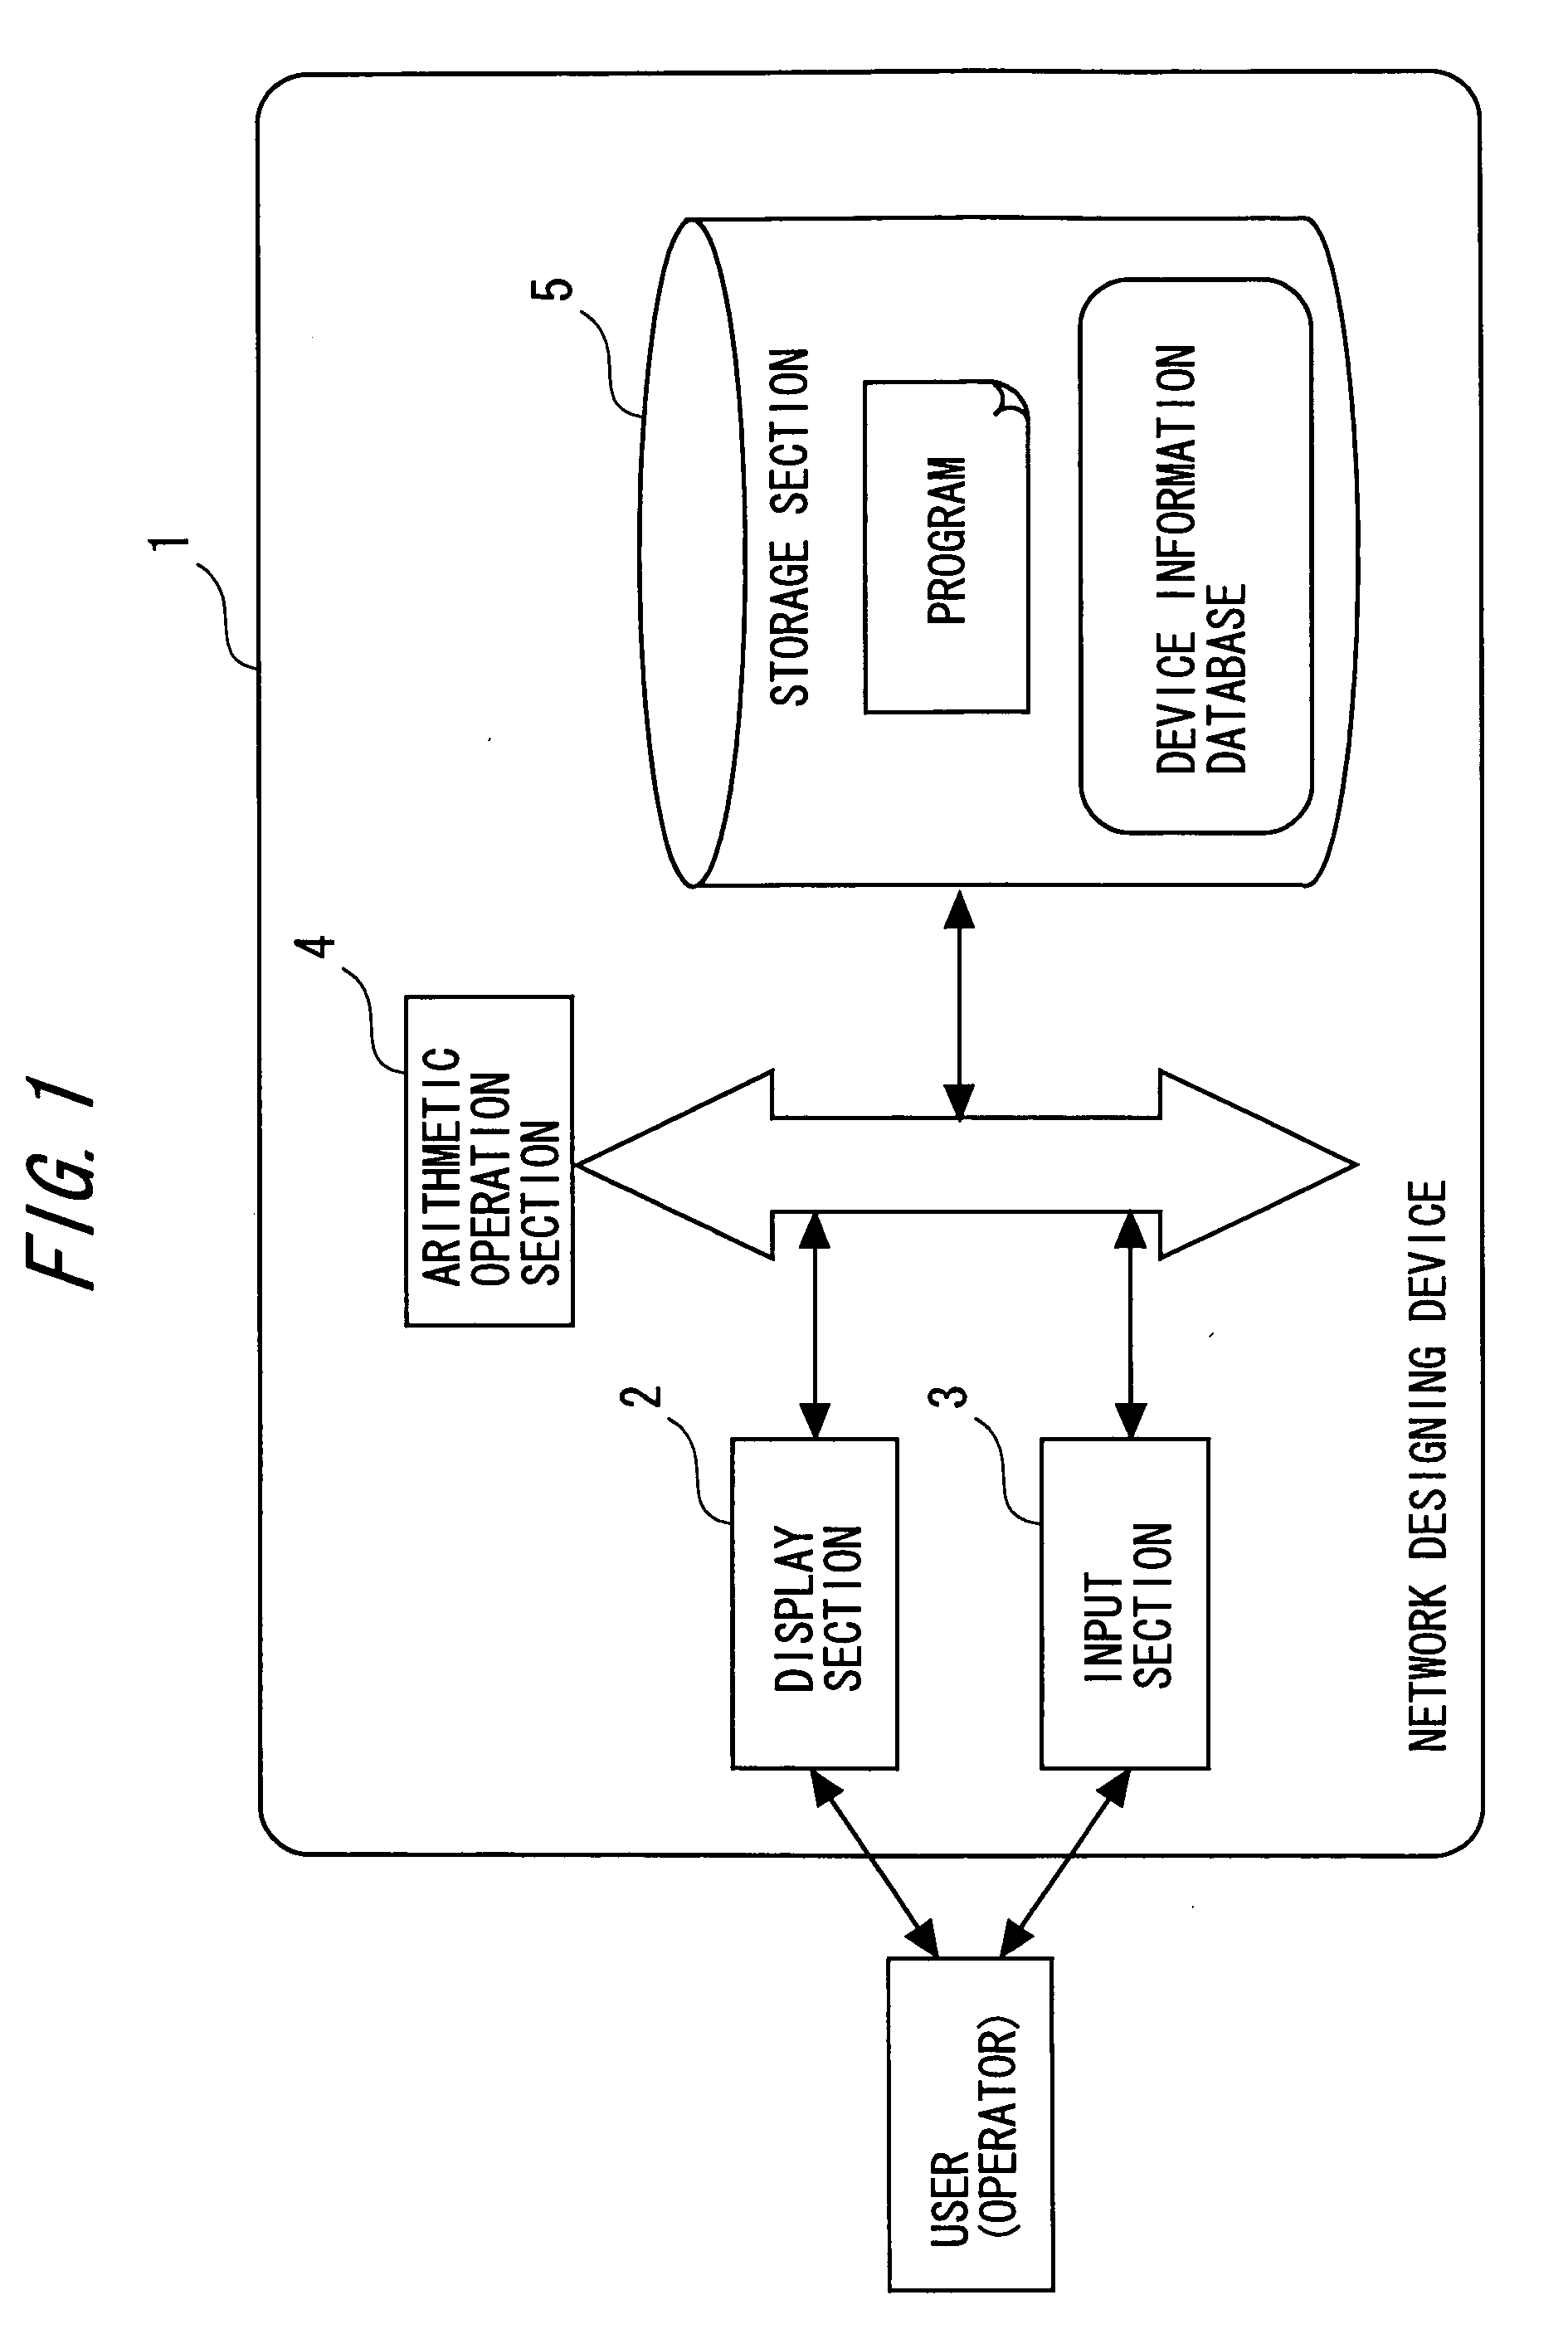 Network designing device and program